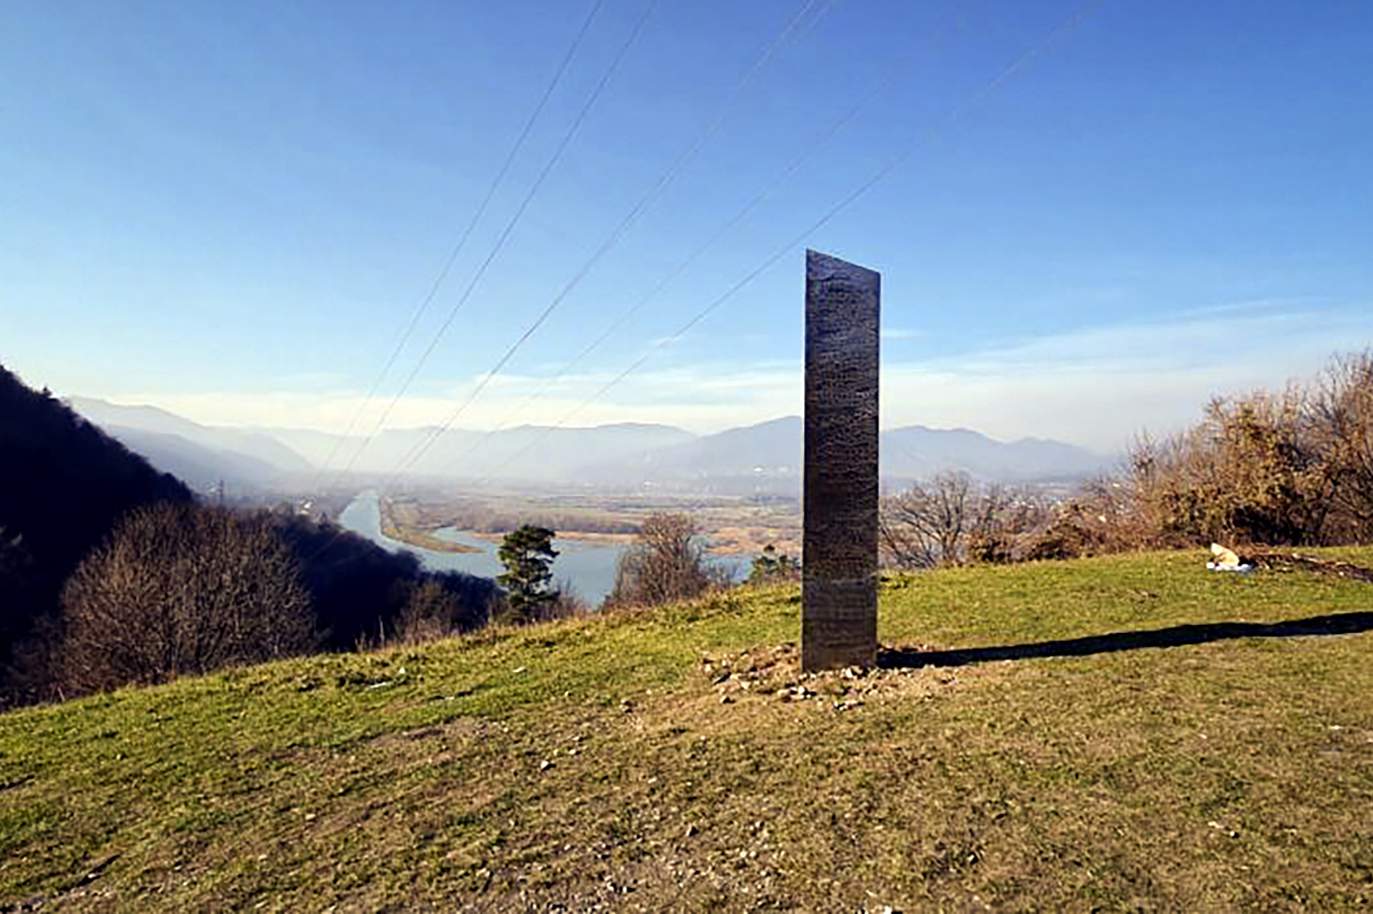 California monolith pops up after finds in Utah, Romania